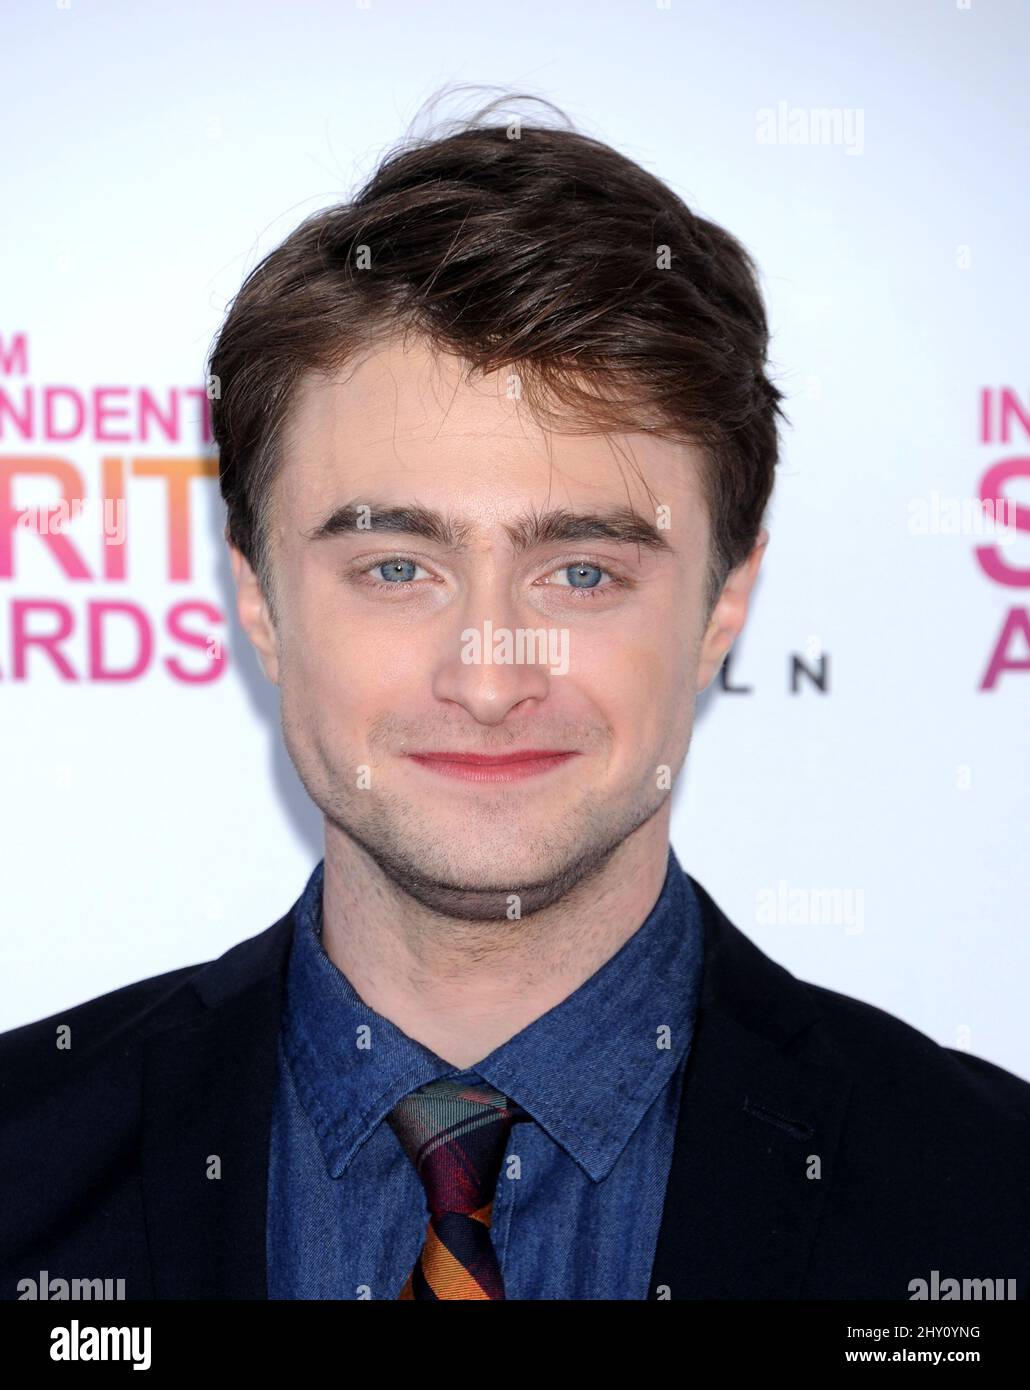 Daniel Radcliffe attending the 2013 Independent Spirit Awards at Santa Monica in California. Stock Photo